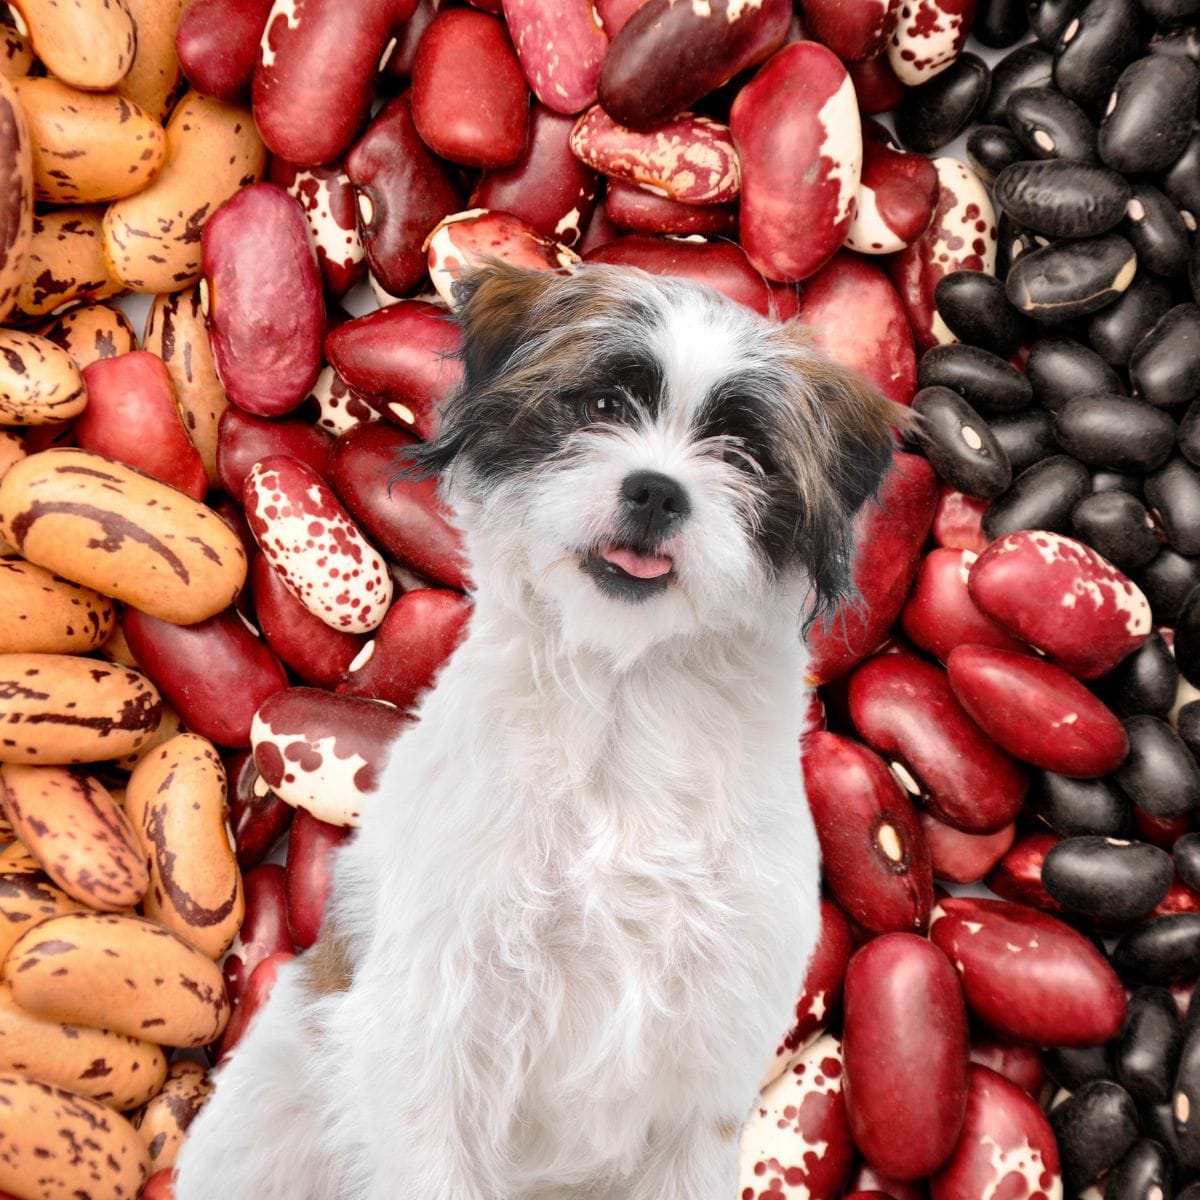 Can Dogs Eat Pinto Beans?